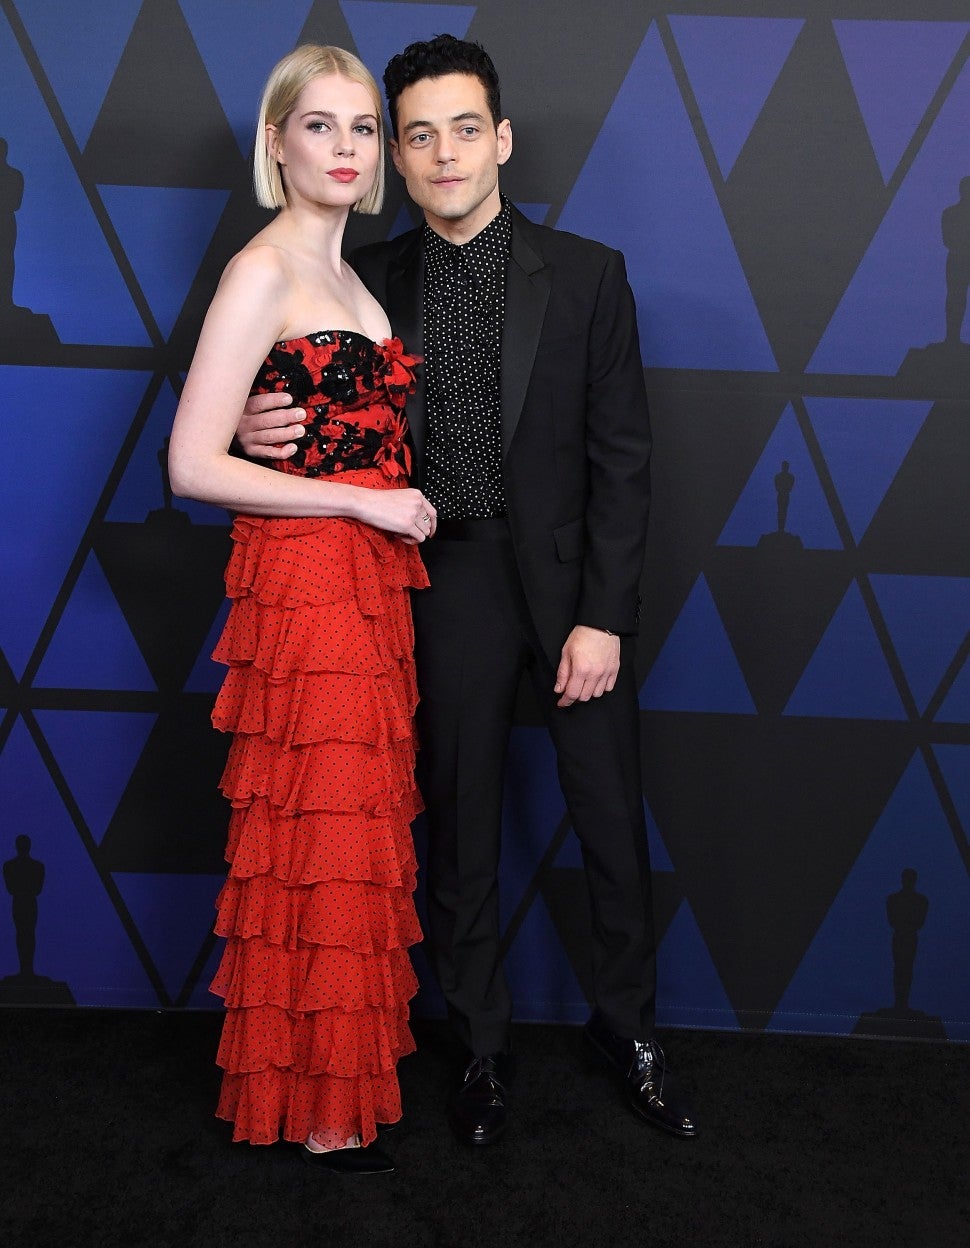 Lucy Boynton, Rami Malek arrive at the Academy Of Motion Picture Arts And Sciences' 10th Annual Governors Awards at The Ray Dolby Ballroom at Hollywood & Highland Center on November 18, 2018 in Hollywood, California. 